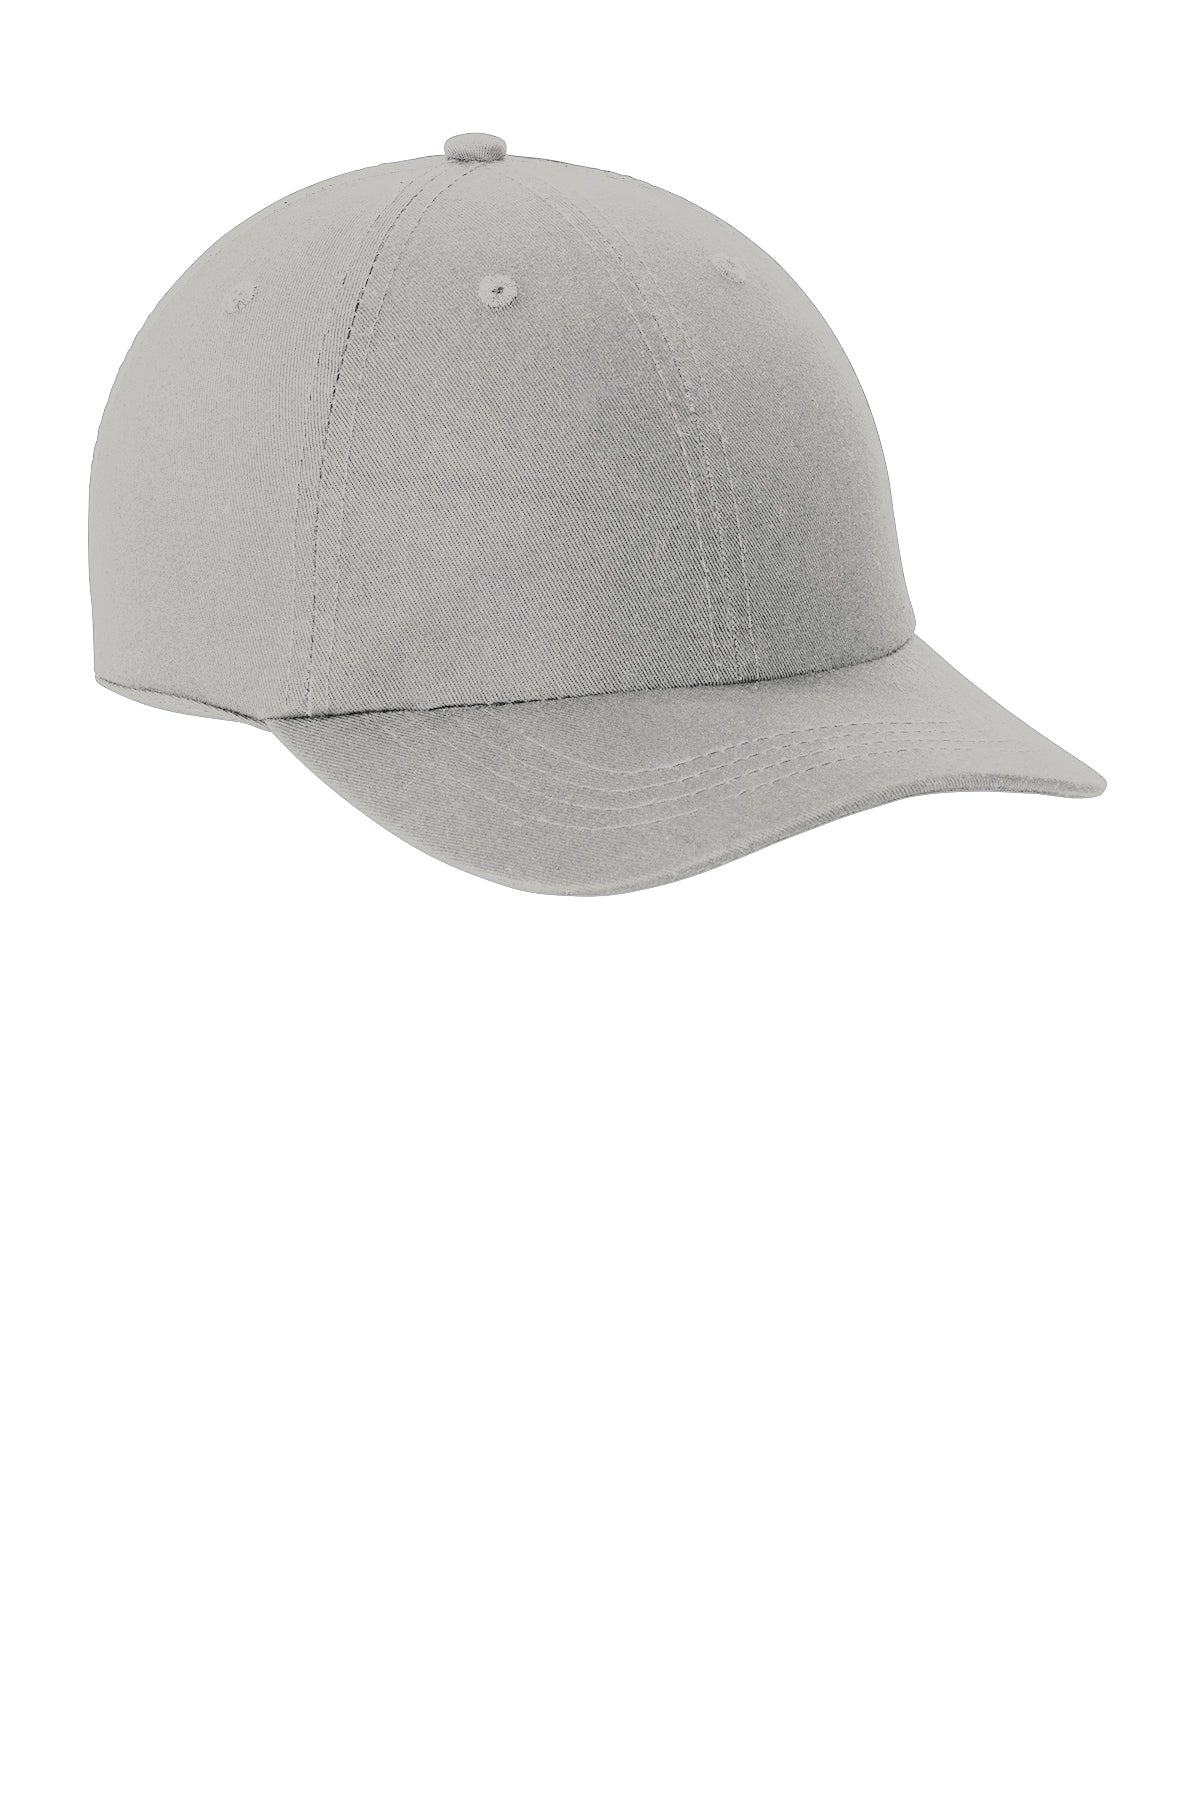 Port & Company® Six-Panel Cap One-Size / Silver